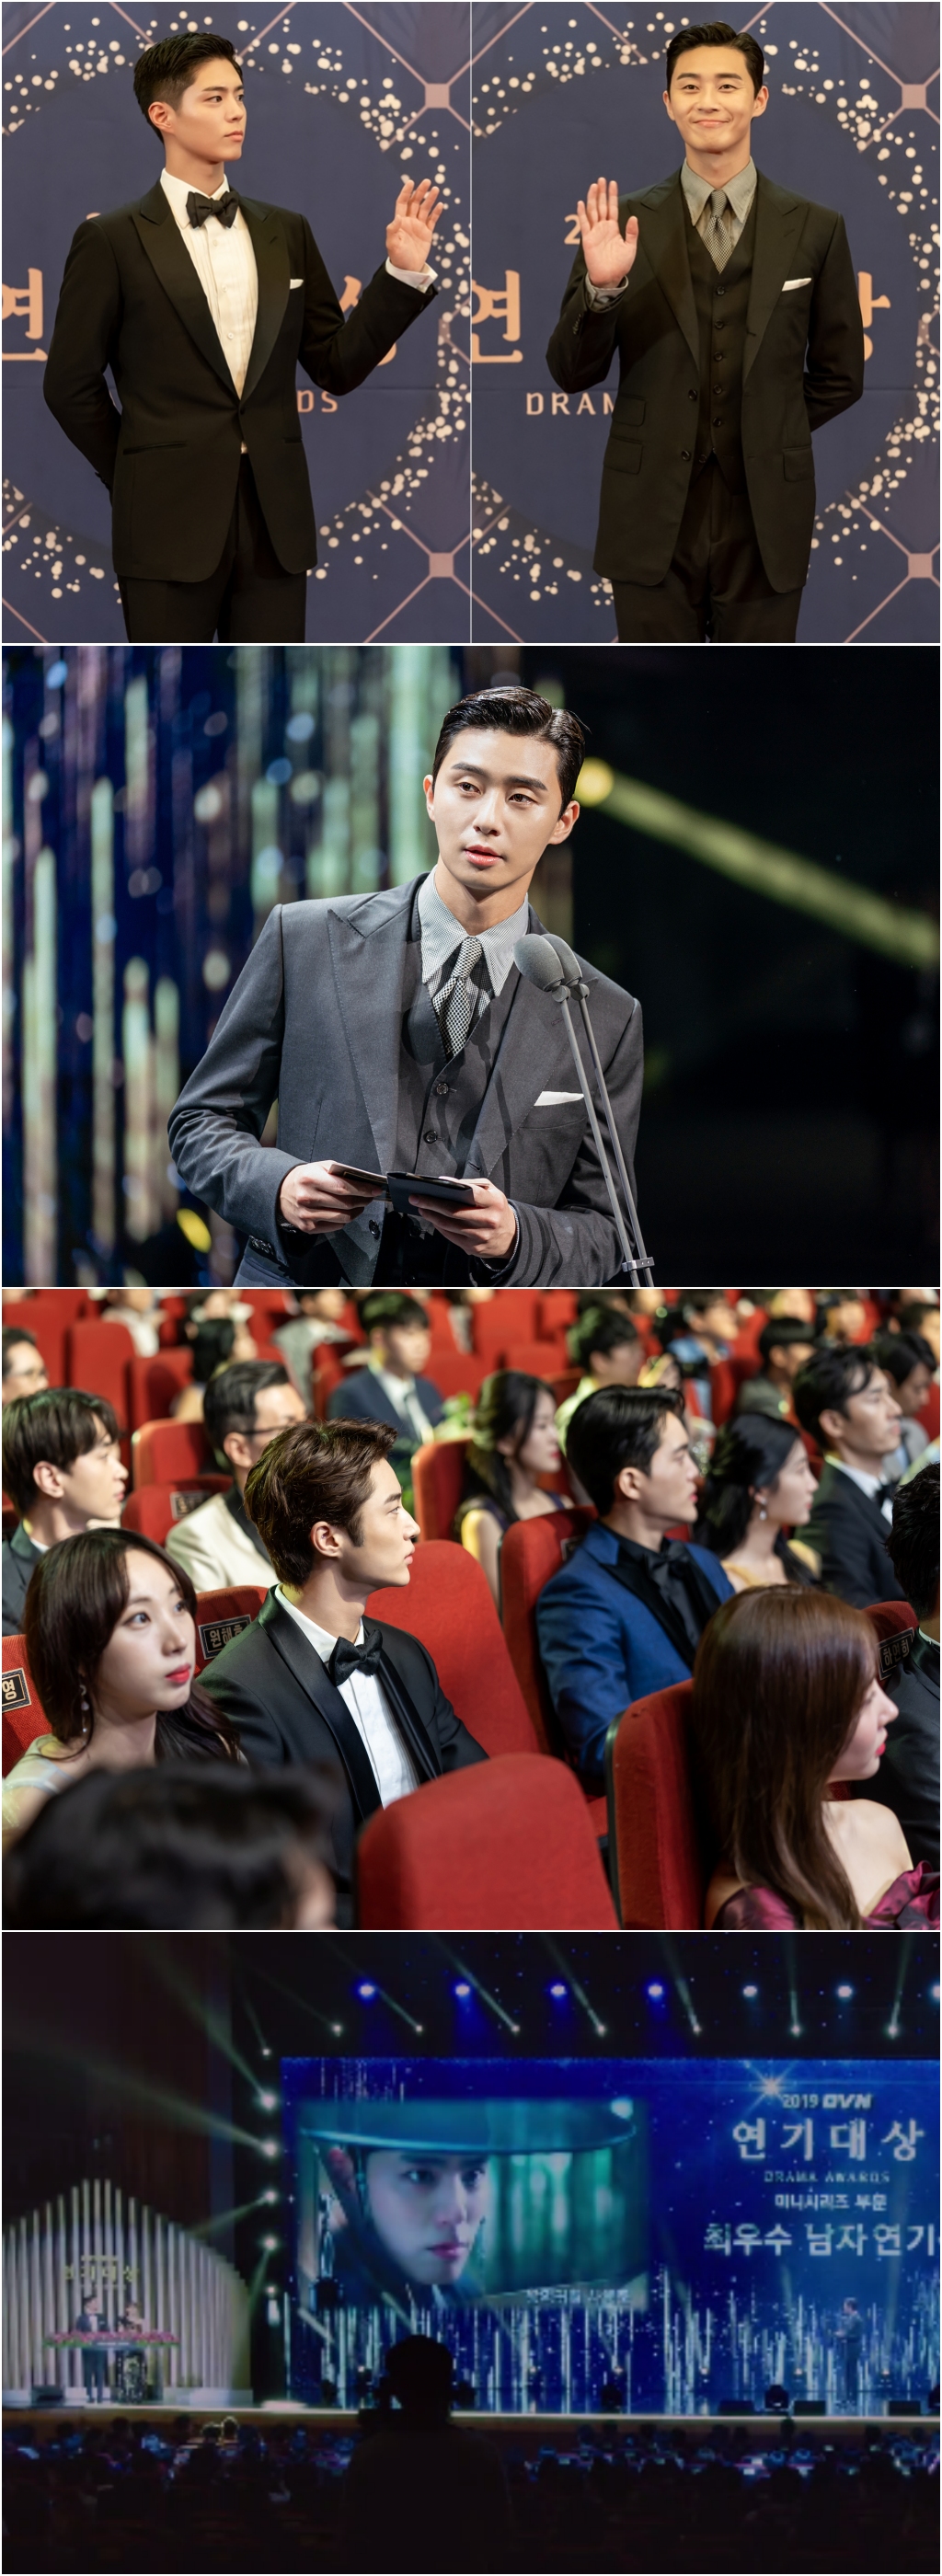 Actor Park Bo-gum, Park Seo-joon met at Youth Records.On May 5, tvNs wall-to-wall drama Youth Records unveiled a still of Park Bo-gum and Park Seo-joons smoke breath.Steele shows Park Seo-joon appearing as top star Song Min-so, raising expectations for the broadcast.  Park Bo-gums glamorous visuals at the awards ceremony are not only eye-catching, but also the aura of Song Min-so is thrilling.It is also interesting to see the tense expressions of Won Hae-hyo (Woo Woo-seok) and Park Do-ha (Kim Kun-woo) waiting for the best male actor award to be announced.  The result is attention to who will be the best male actor and whether Song Min-so, who has a special relationship with Sahye-jun, can win the trophy to Sahye-jun.According to the production team, in the ninth episode, which is broadcast on the same day, Sahye-juns performance as an actor is depicted.  Earlier, Sahye-jun had announced that he wanted to play The Return of the King, a historical drama with a work of art, instead of a romance drama that was guaranteed to be popular in his next film.  His move as a rising star adds to his expectations.  The Youth records crew is at the beginning of The Hye-Juns era.  In particular, Park Seo-joon has made a special appearance and the second act is hotter.  We look forward to his performance, which will add to the power of disassembly with song Min-so, a top star who has a special relationship with Sahye-jun.Youth records airs every Monday and Tuesday at 9 p.m.iMBC Jang Jung - Courtesy tvN